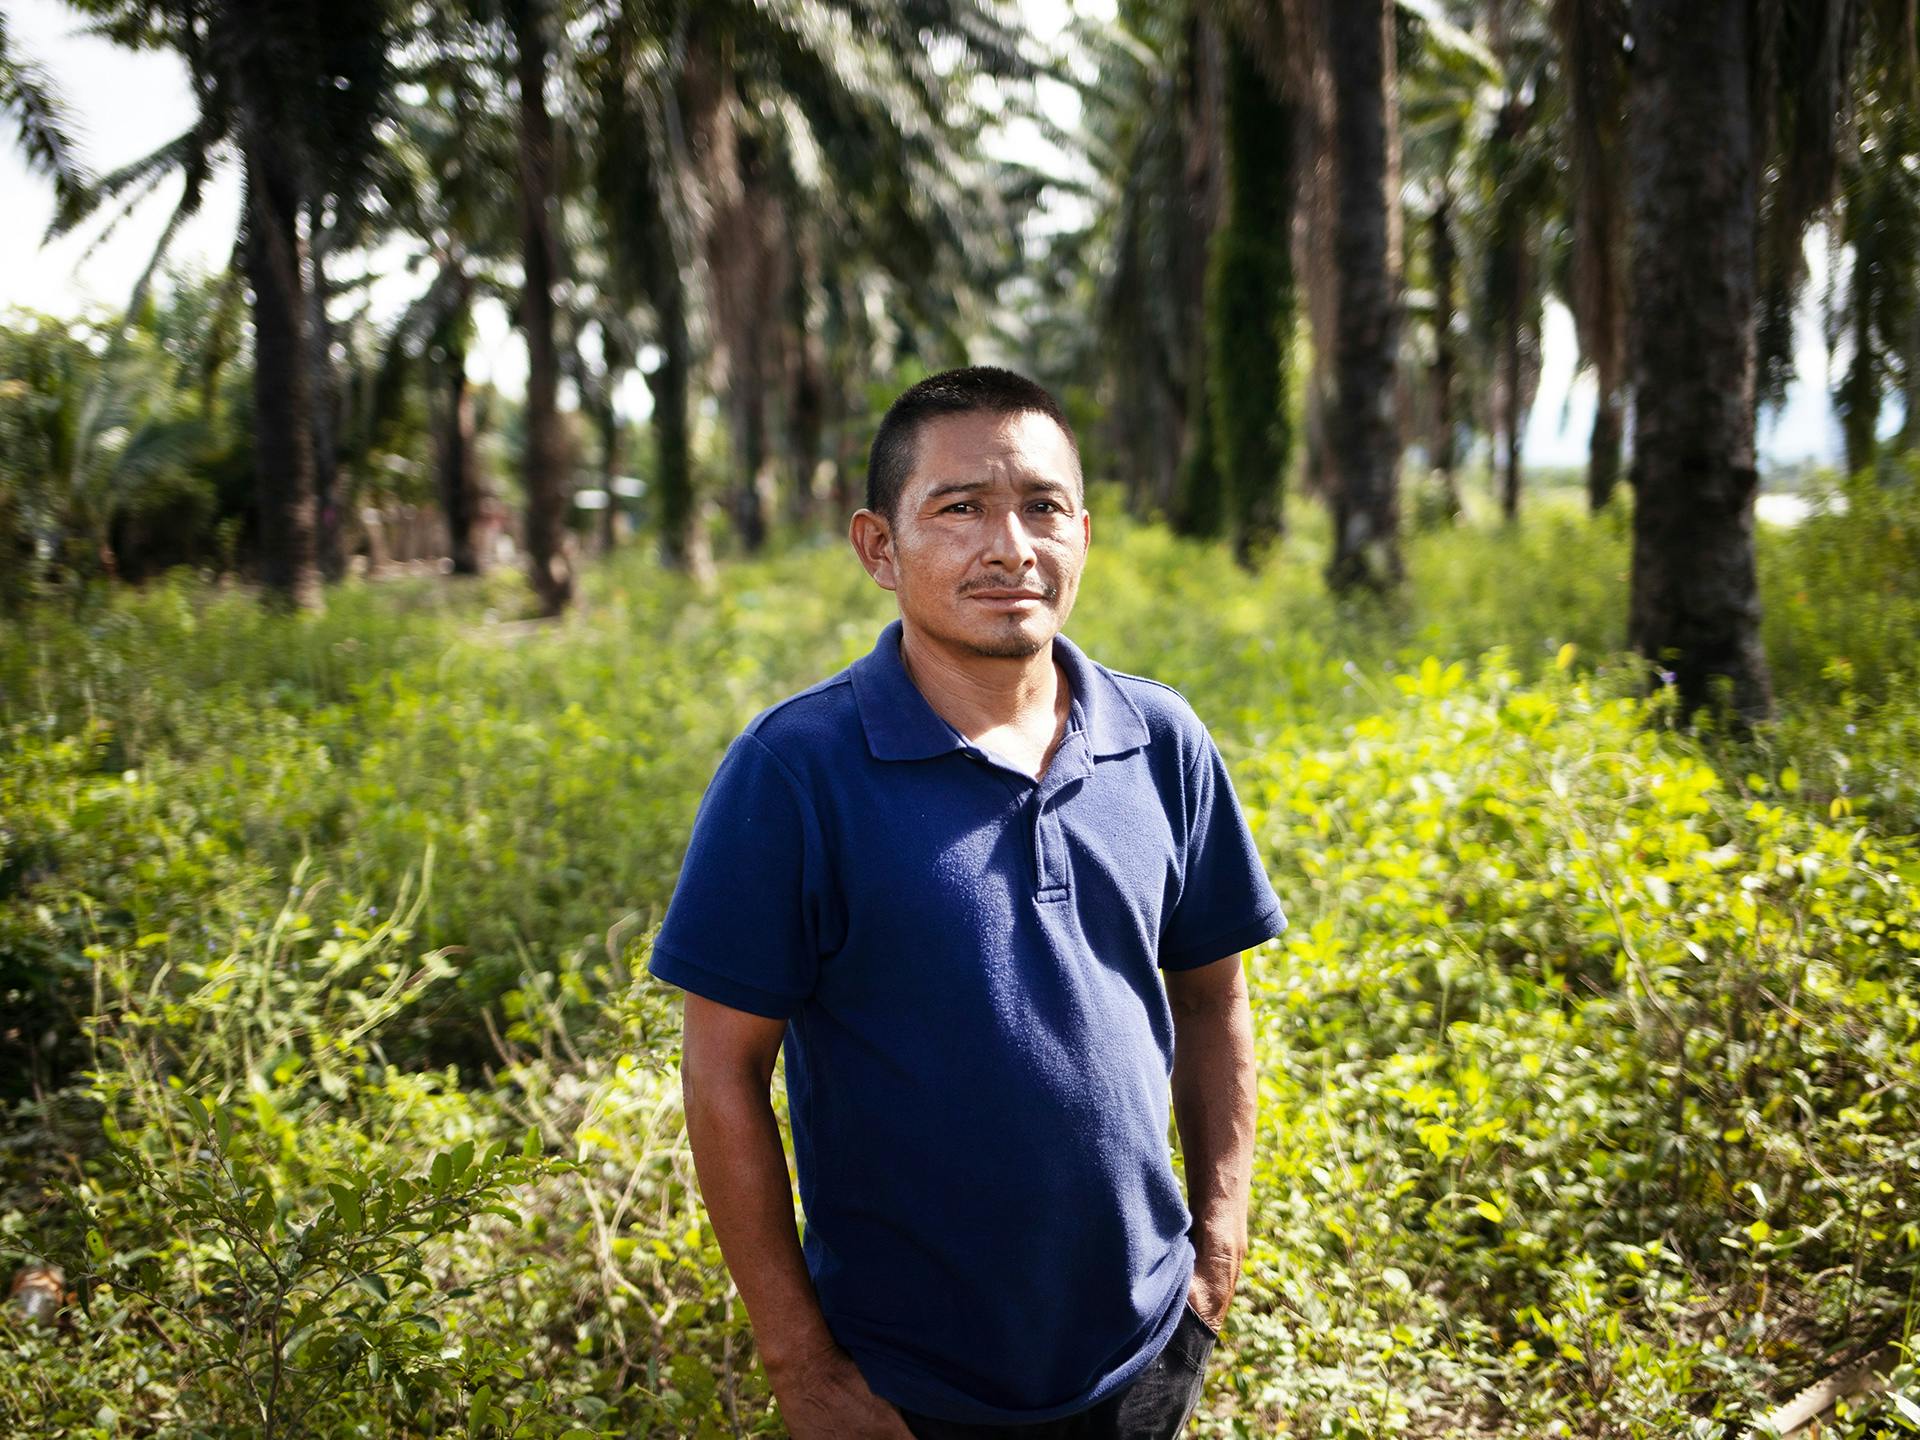 A man wearing a blue t-shirt stadning in a forest looking into the camera.